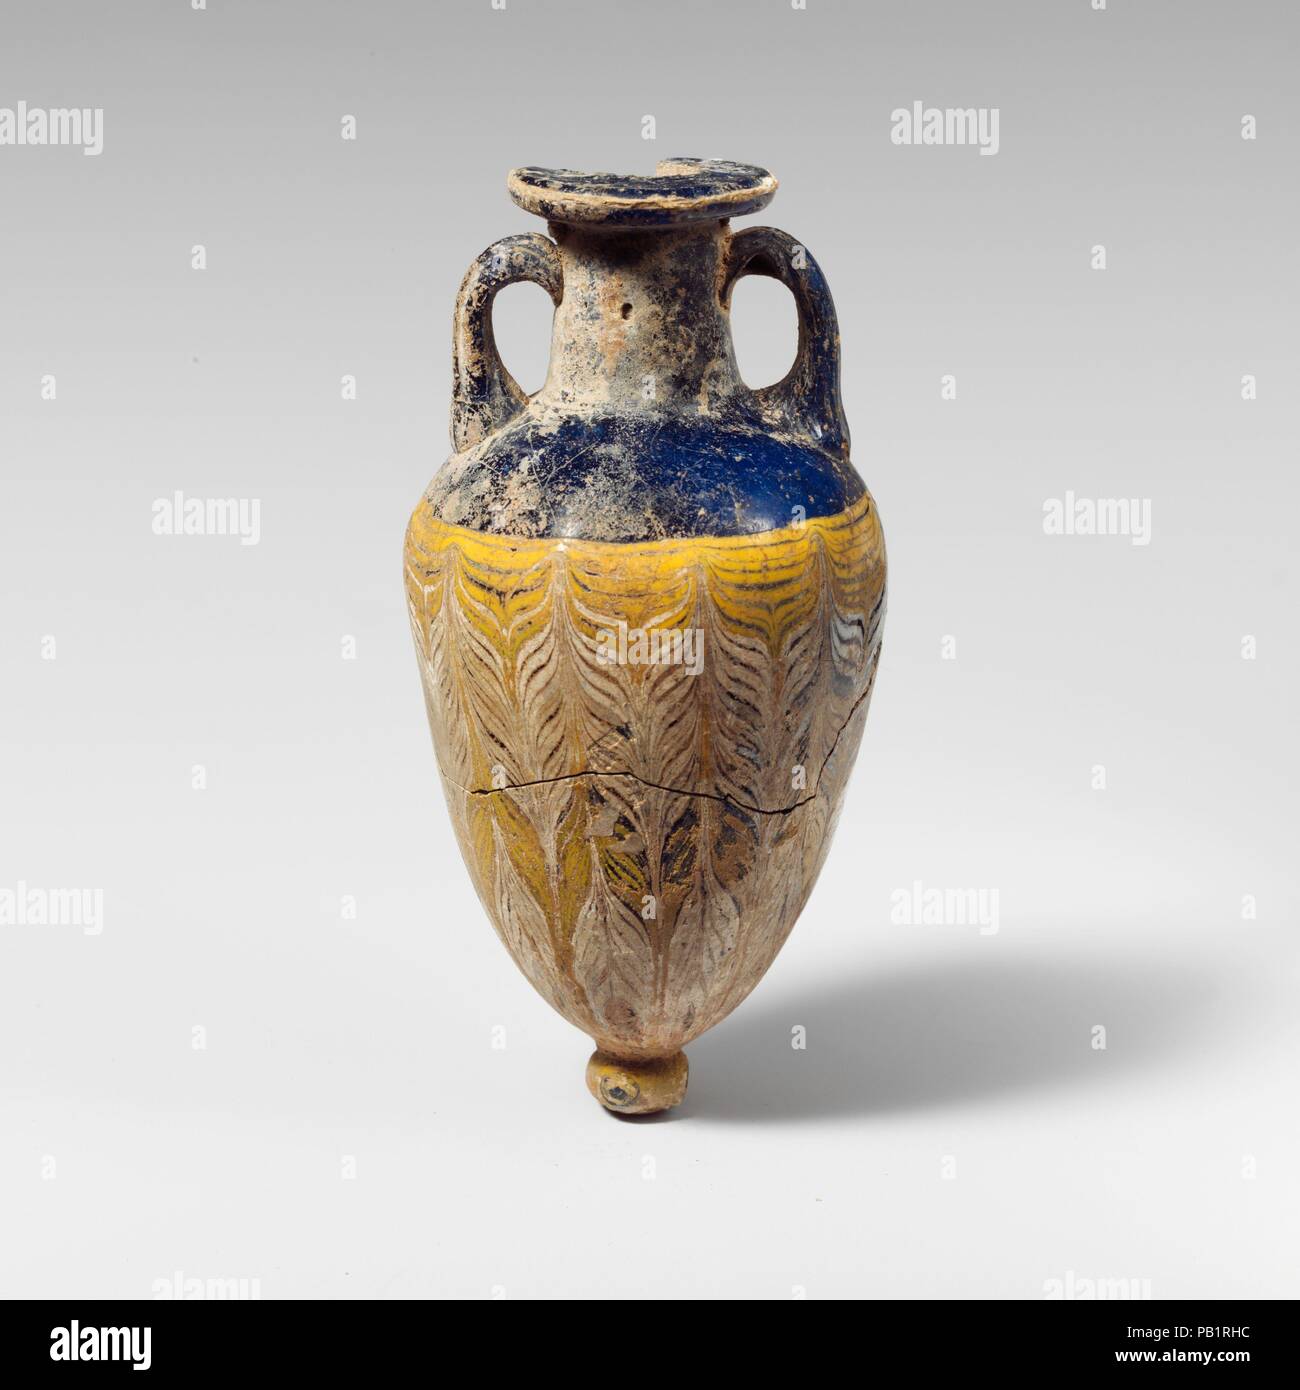 Glass amphoriskos (perfume bottle). Culture: Greek, Eastern Mediterranean or Italian. Dimensions: H.: 4 3/8 in. (11.1 cm). Date: 4th-3rd century B.C..  Translucent cobalt blue, with handles and base-knob in same color; trails in opaque yellow and opaque white.  Broad horizontal rim-disk with rounded edge; cylindrical neck, expanding slightly downwards; broad, sloping shoulder; elongated ovoid body, tapering sharply downwards; applied small circular base-knob with uneven bottom; two strap handles applied to shoulder and drawn up, turned in, and pressed on to neck.  One fine white trail attached Stock Photo